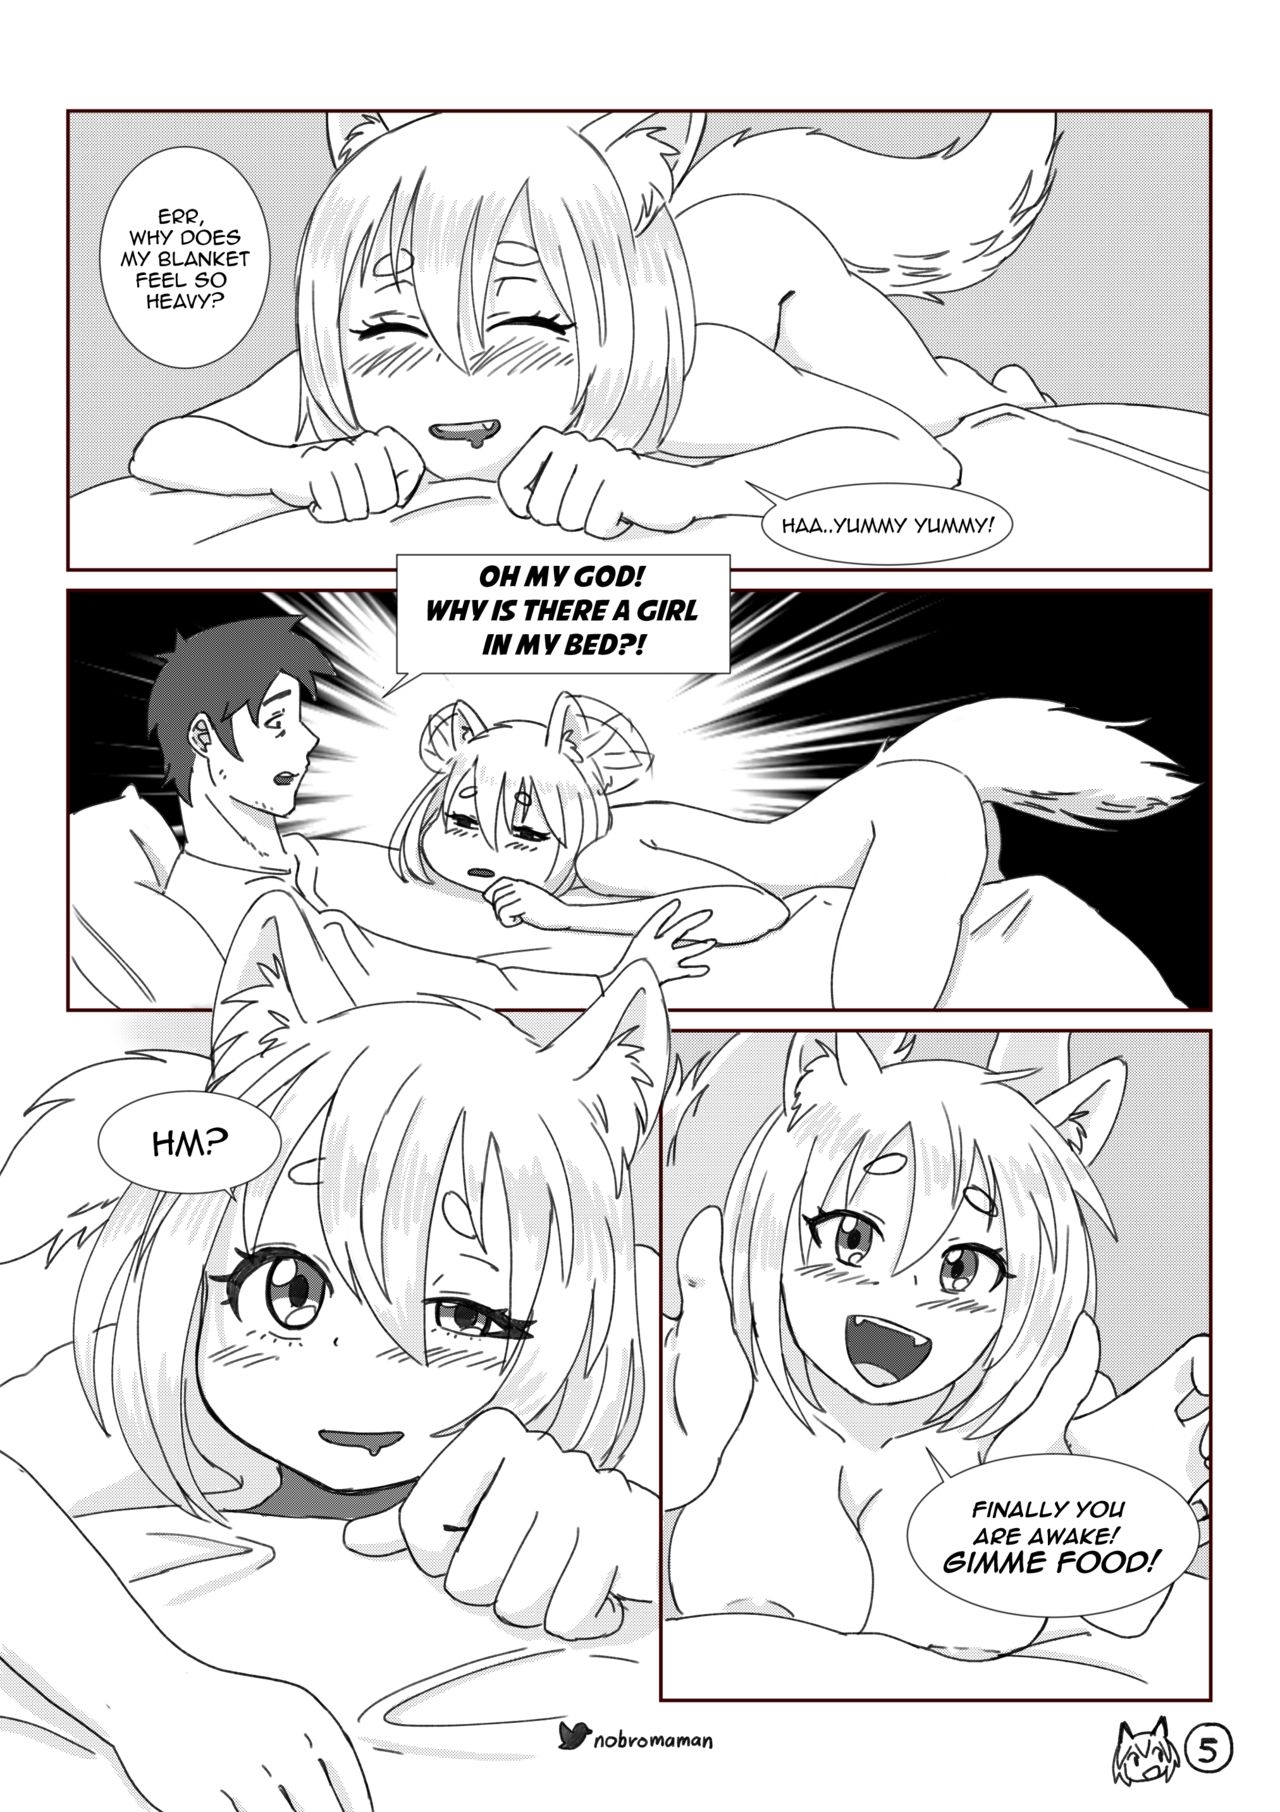 Life with a dog girl - Chapter1 (ongoing) 5